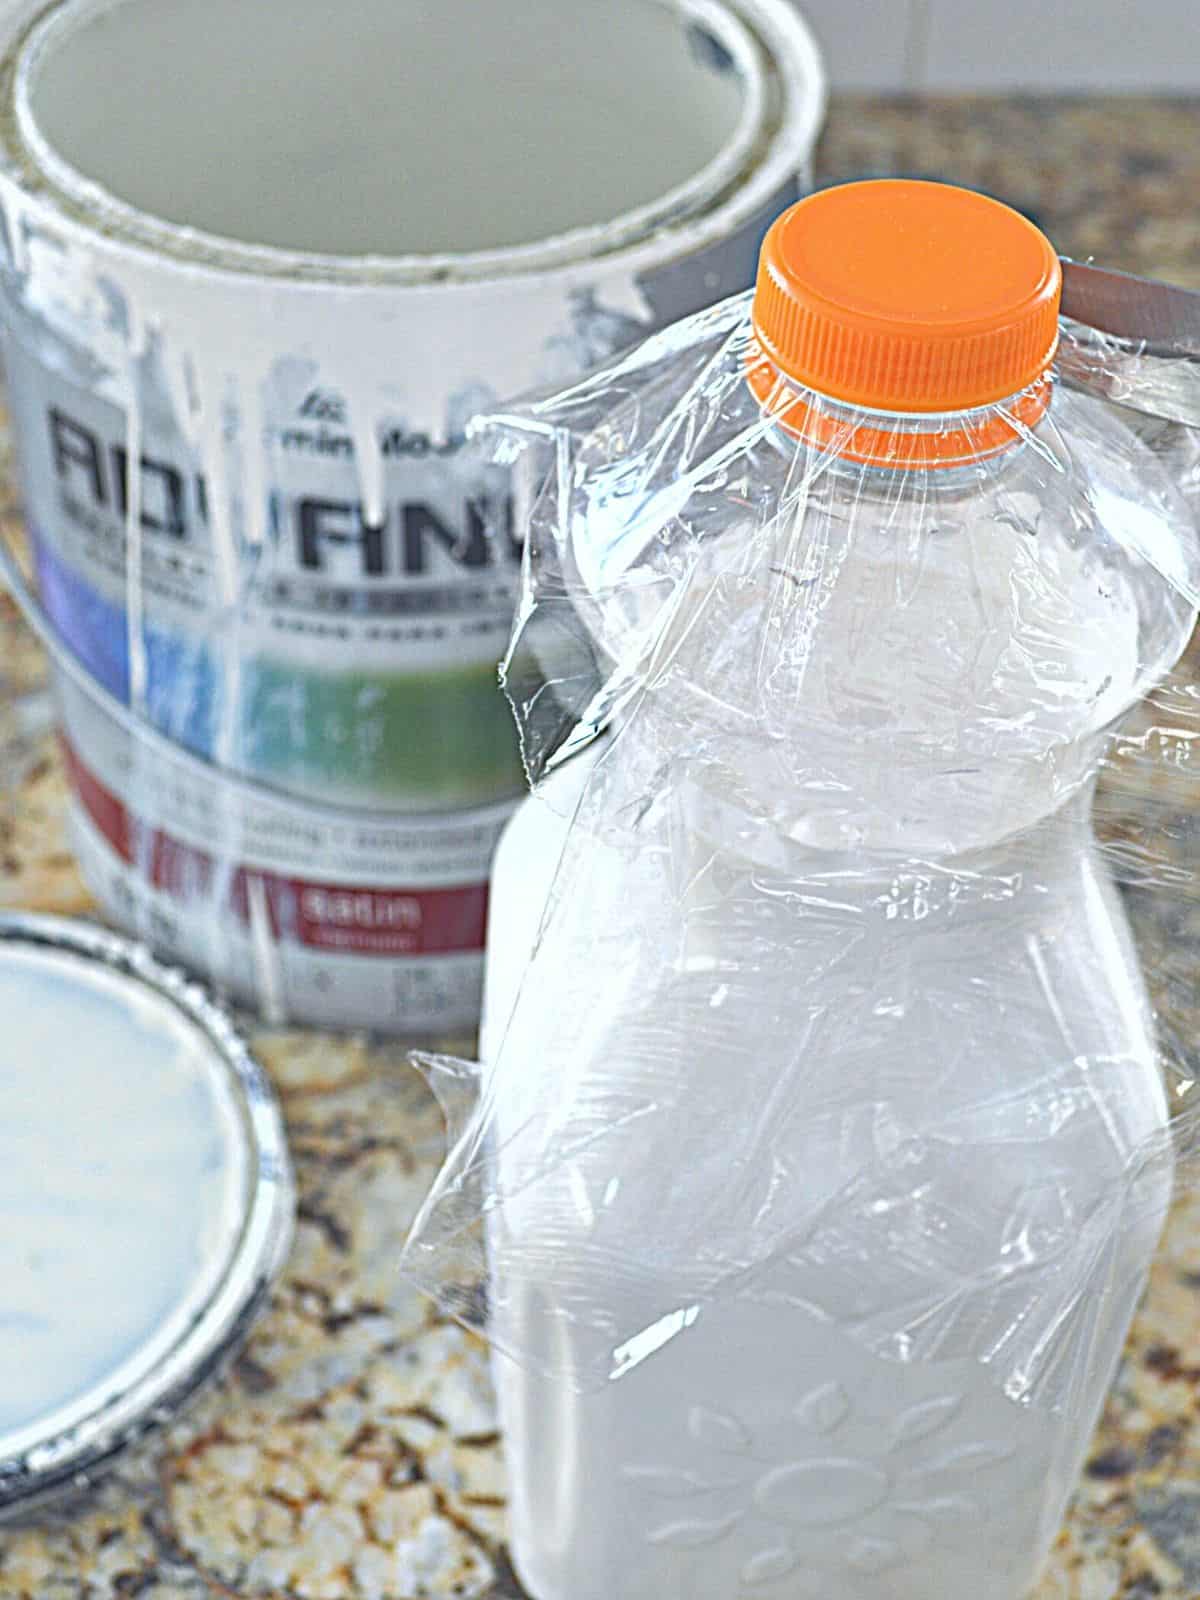 paint in plastic container with orange lid